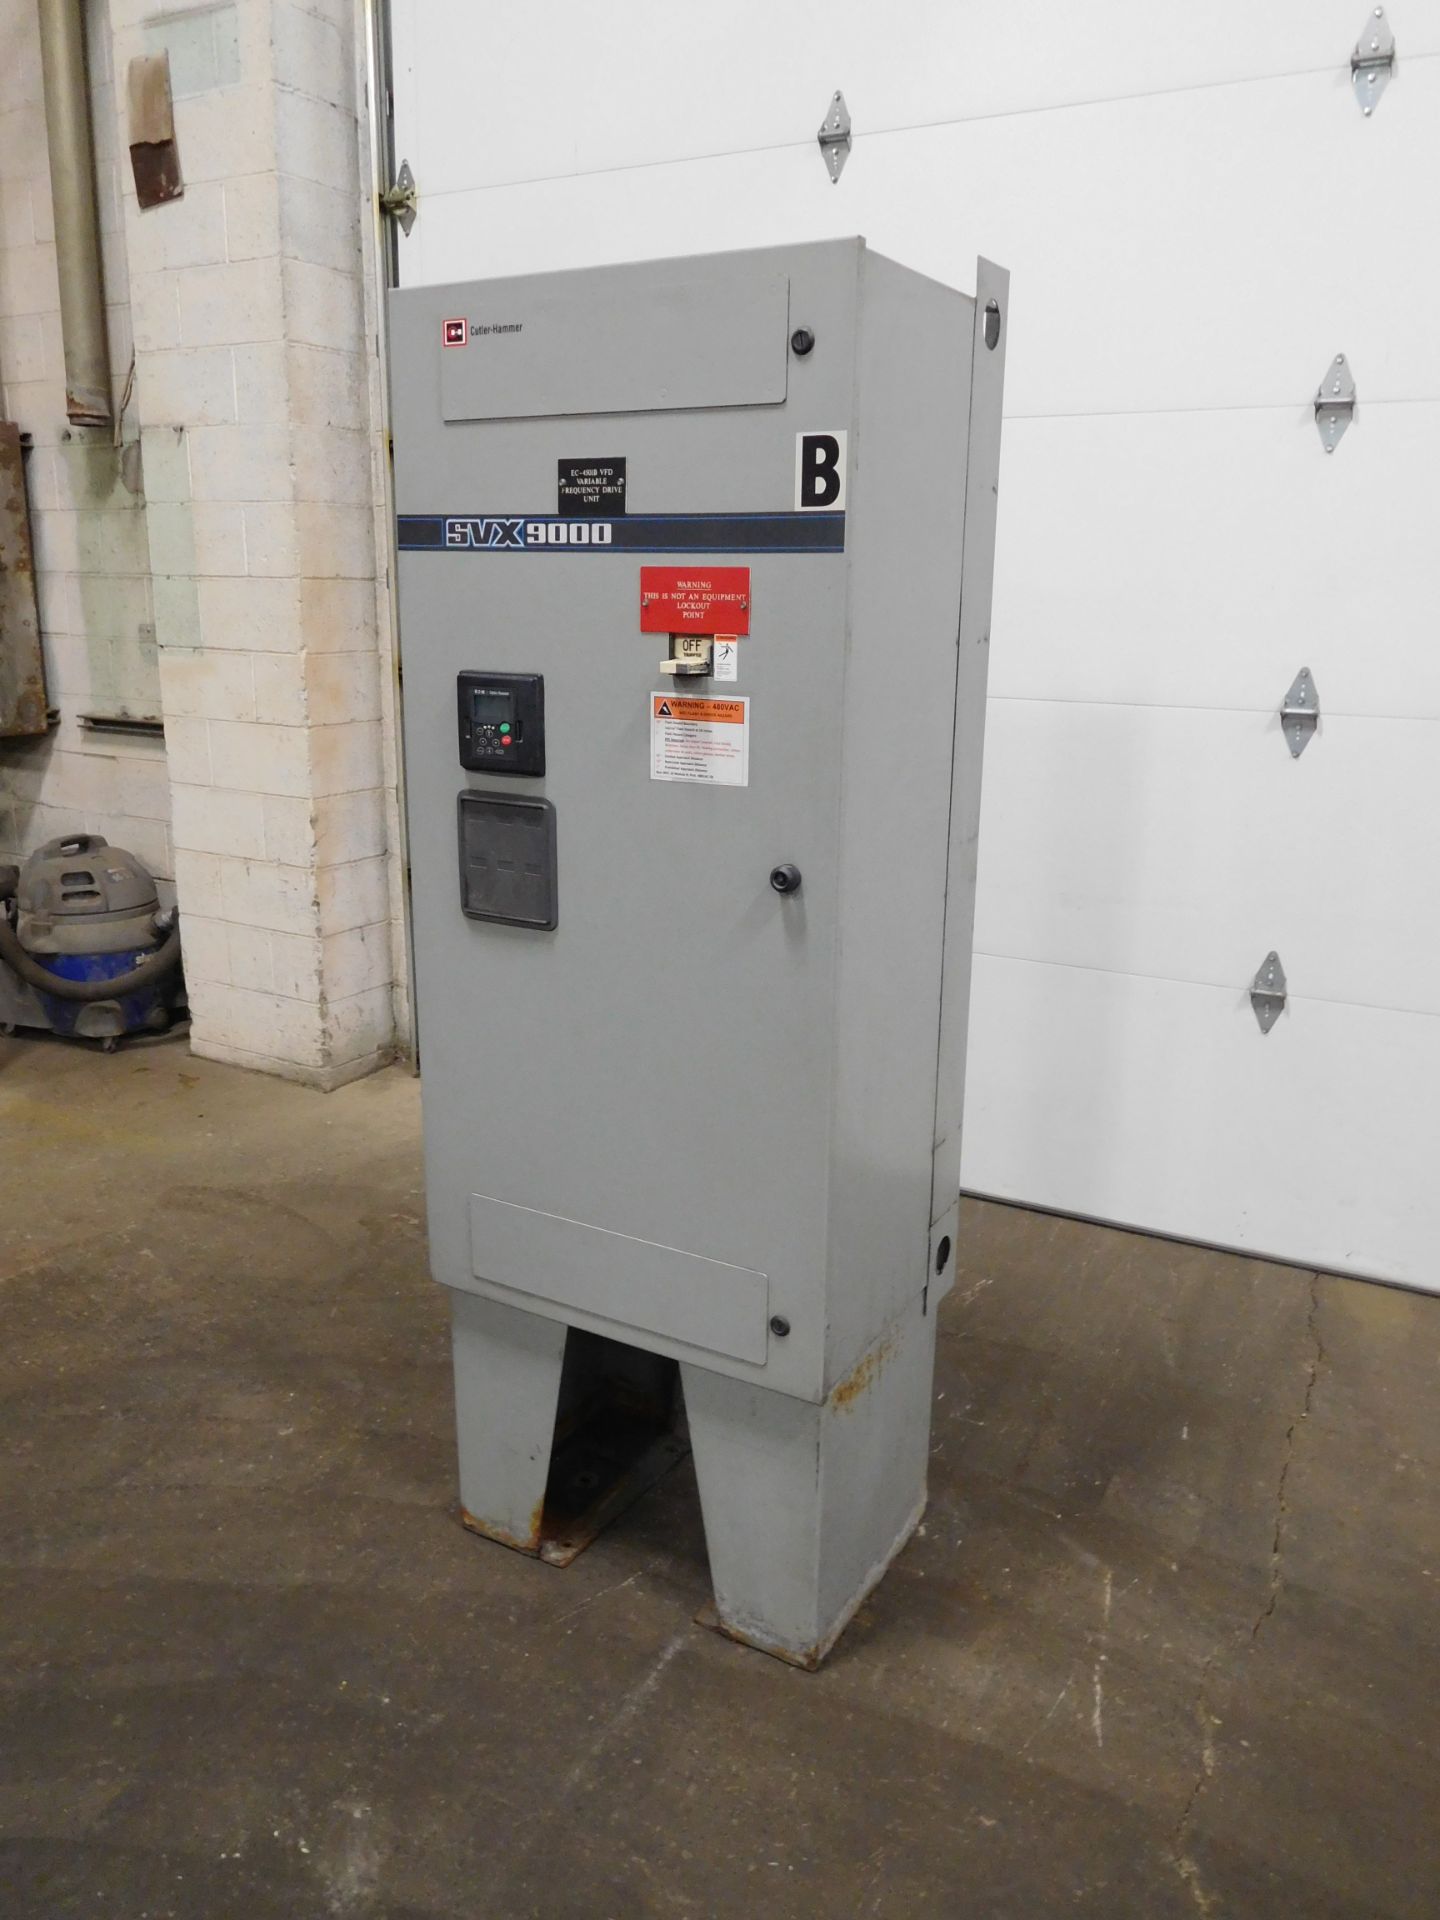 Eaton Cutler-Hammer SVX 9000 Variable Frequency Drive, 60 HP, 3 PH - Image 4 of 11